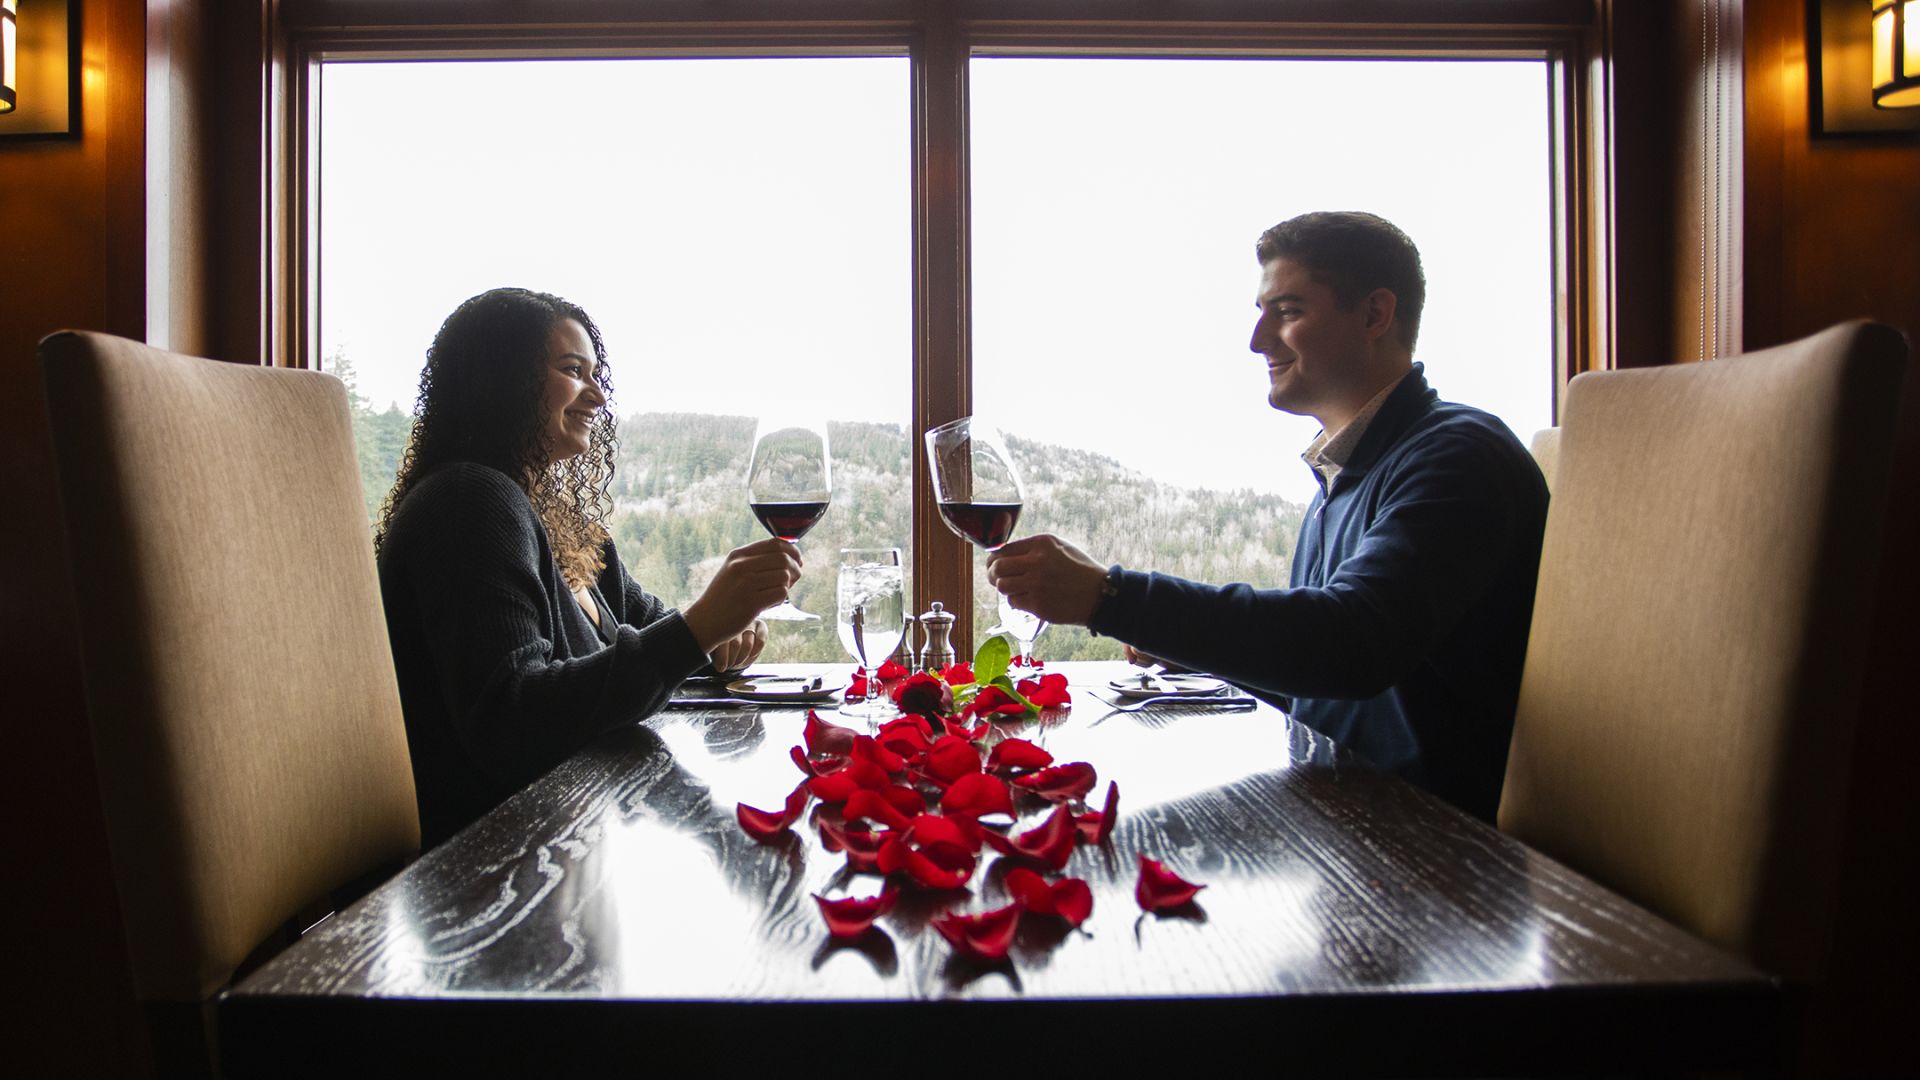 A Man And Woman Sitting At A Table With Wine Glasses